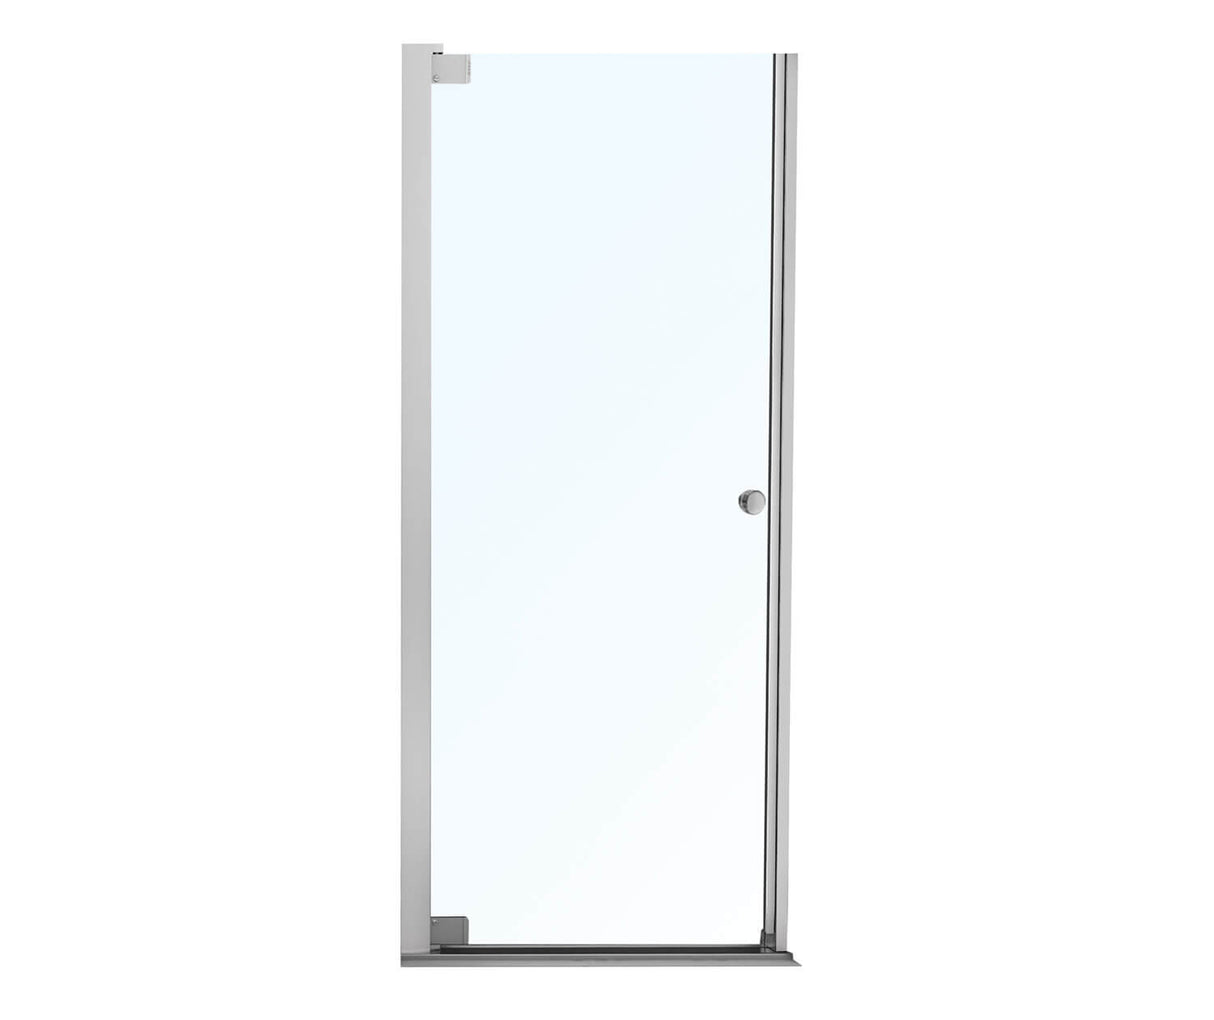 MAAX 105420-900-084-000 Madono 24 ½-26 ½ x 67 in. 6 mm Pivot Shower Door for Alcove Installation with Clear glass in Chrome